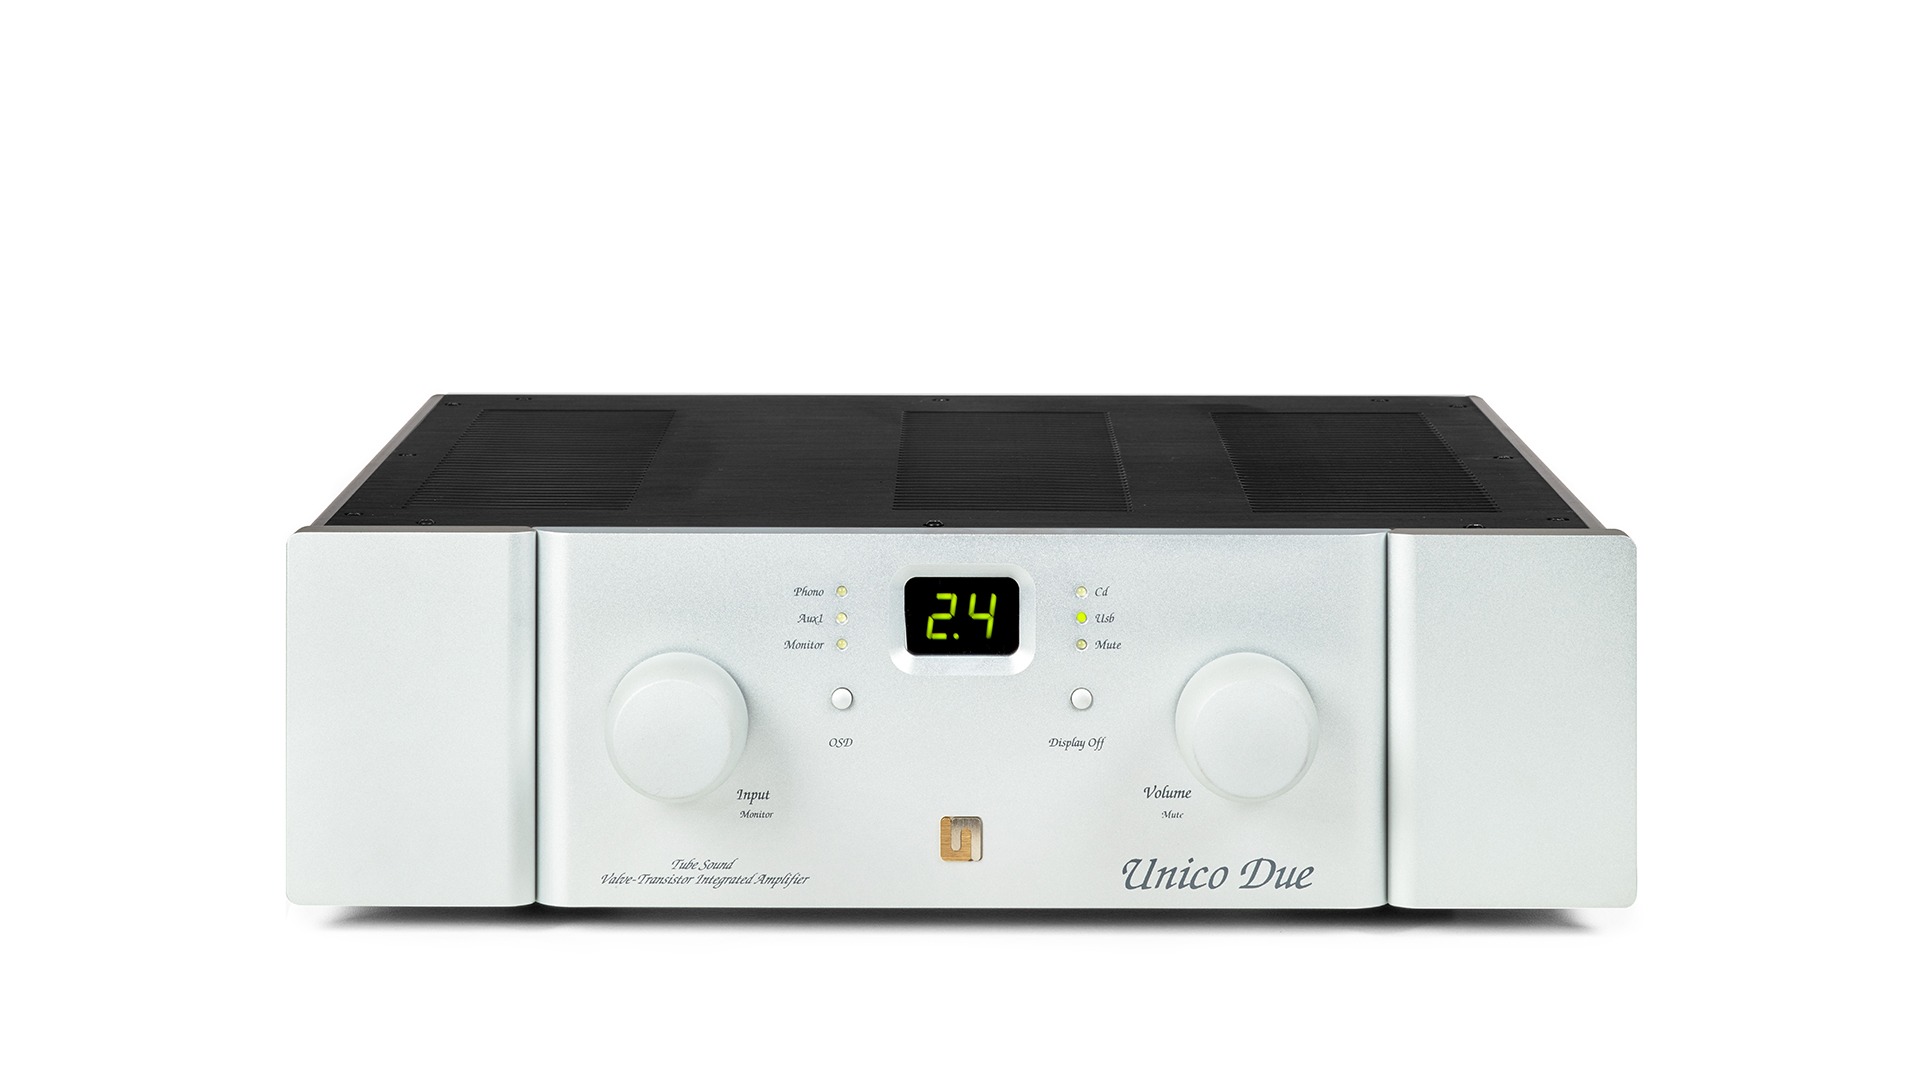 Unison Research Unico Due integrated amplifier